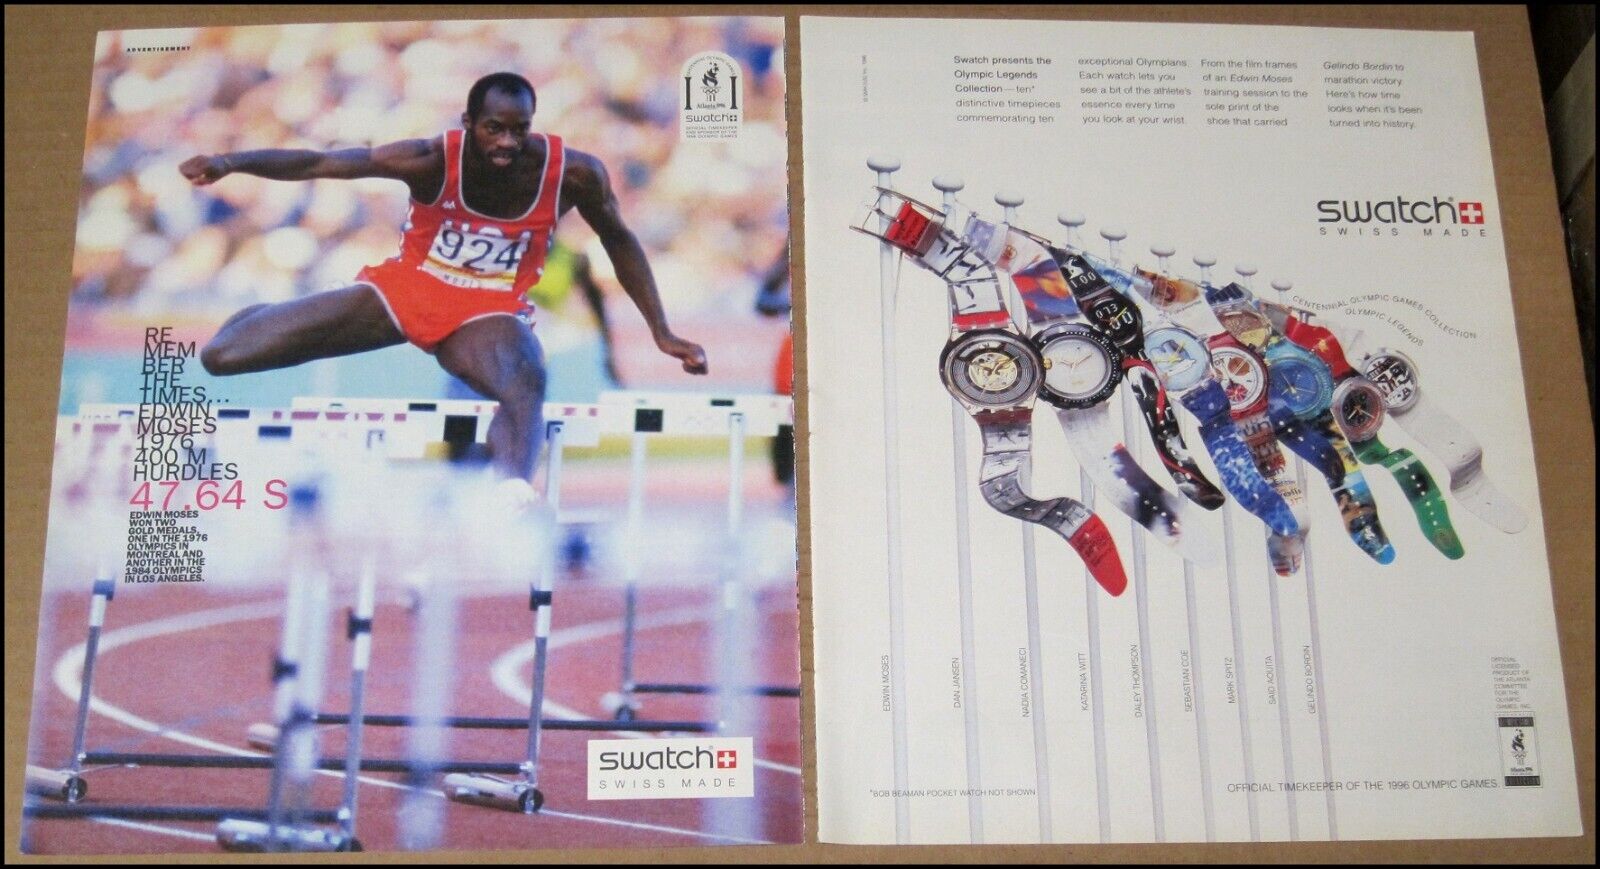 1996 Olympian Edwin Moses Swatch 2-Page Print Ad Advertisement Olympic Legend